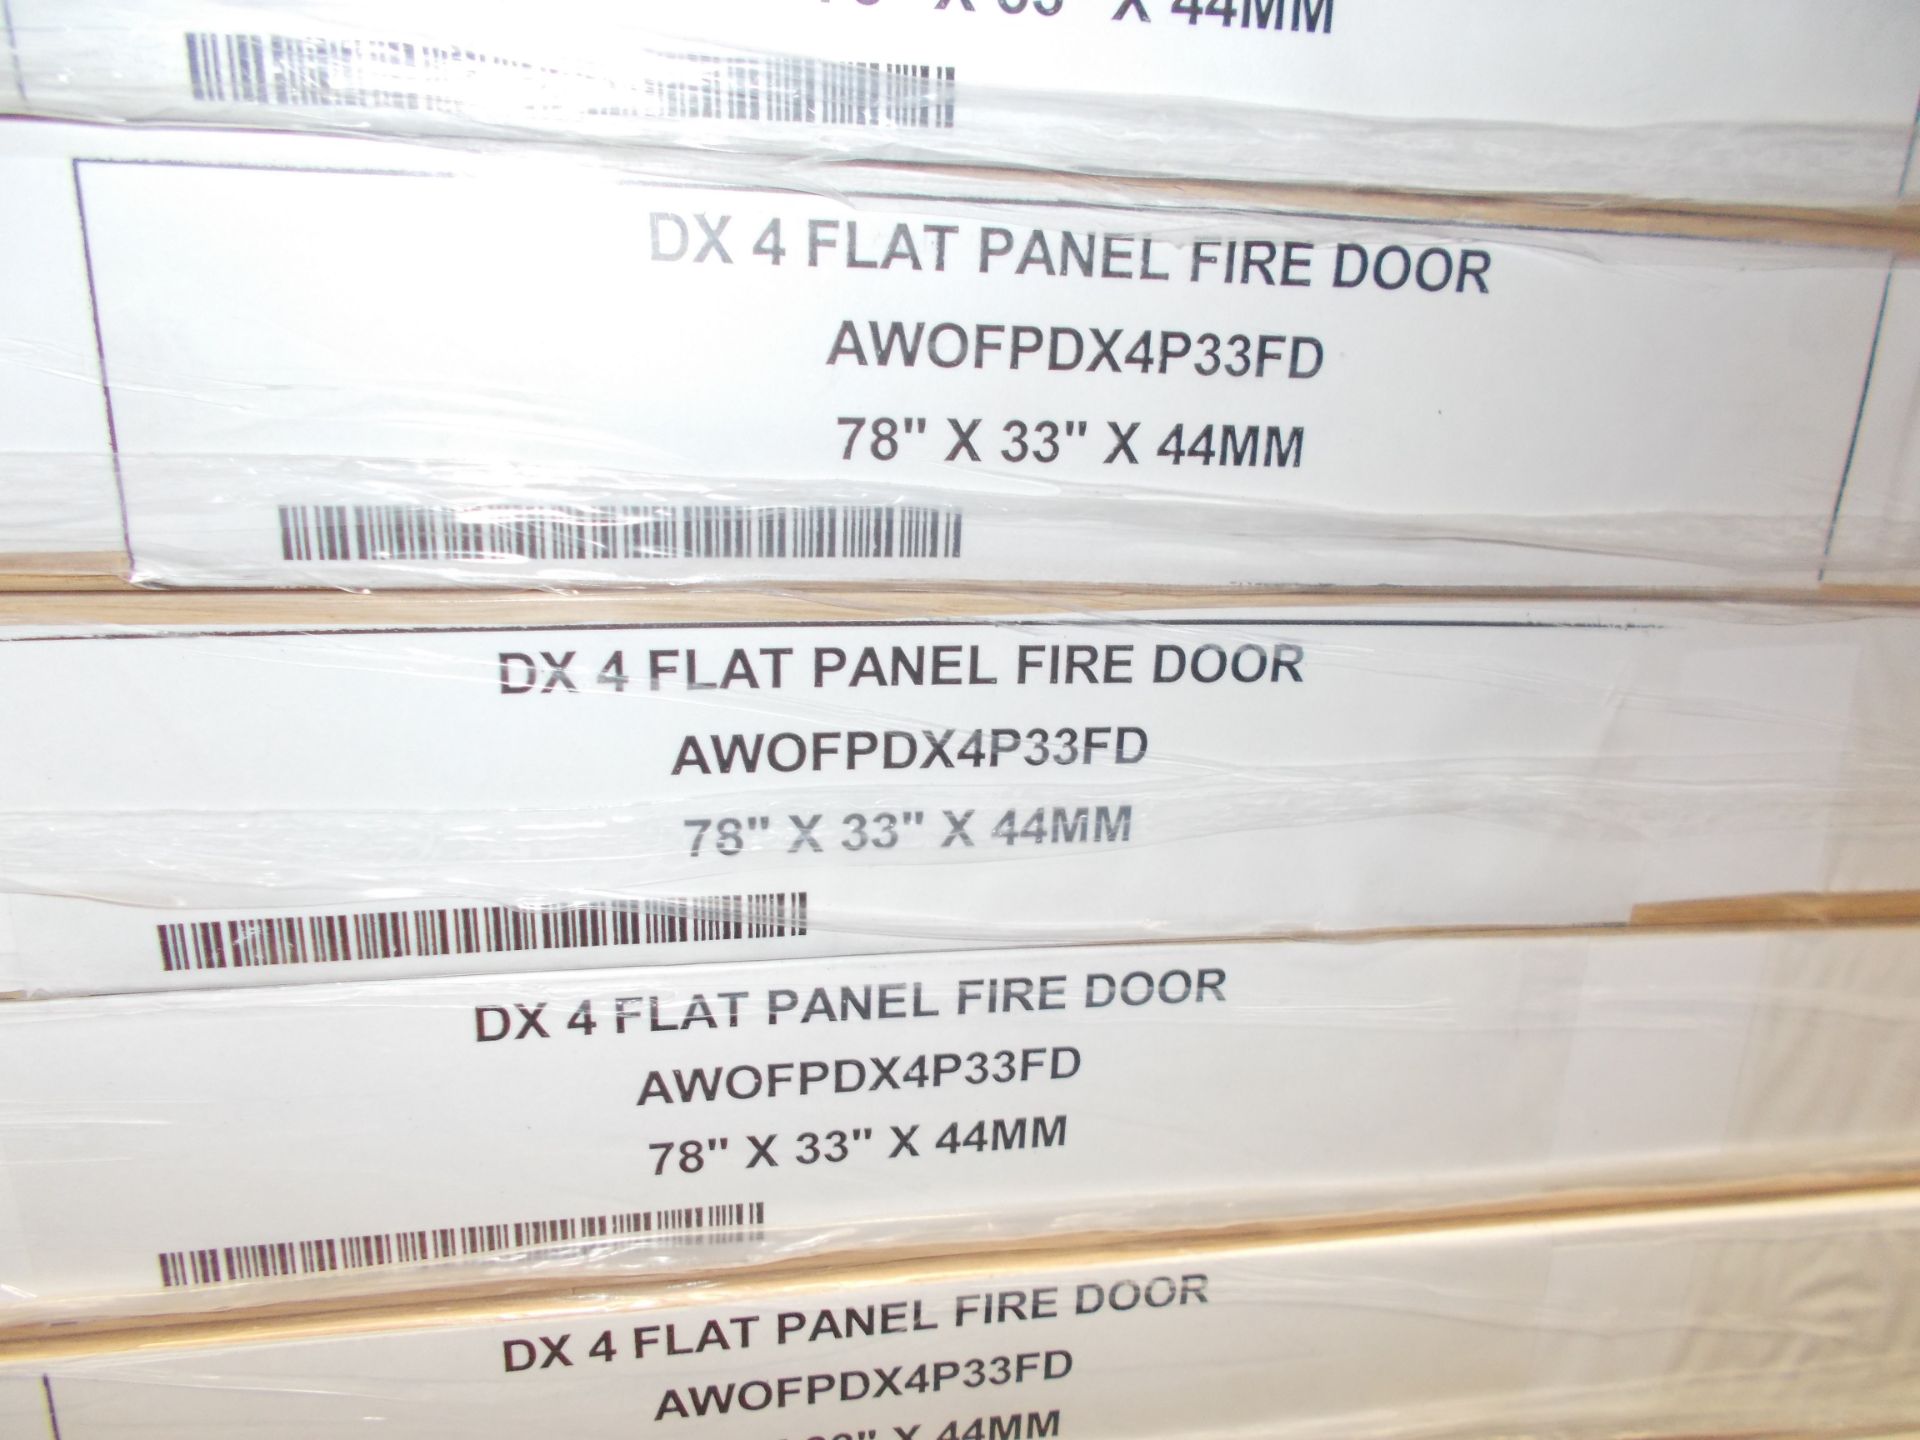 3 x DX 4 Flat Panel Fire Door AWOFPDX4P33FD 78”x33”x44mm - Lots to be handed out in order they are - Image 3 of 3